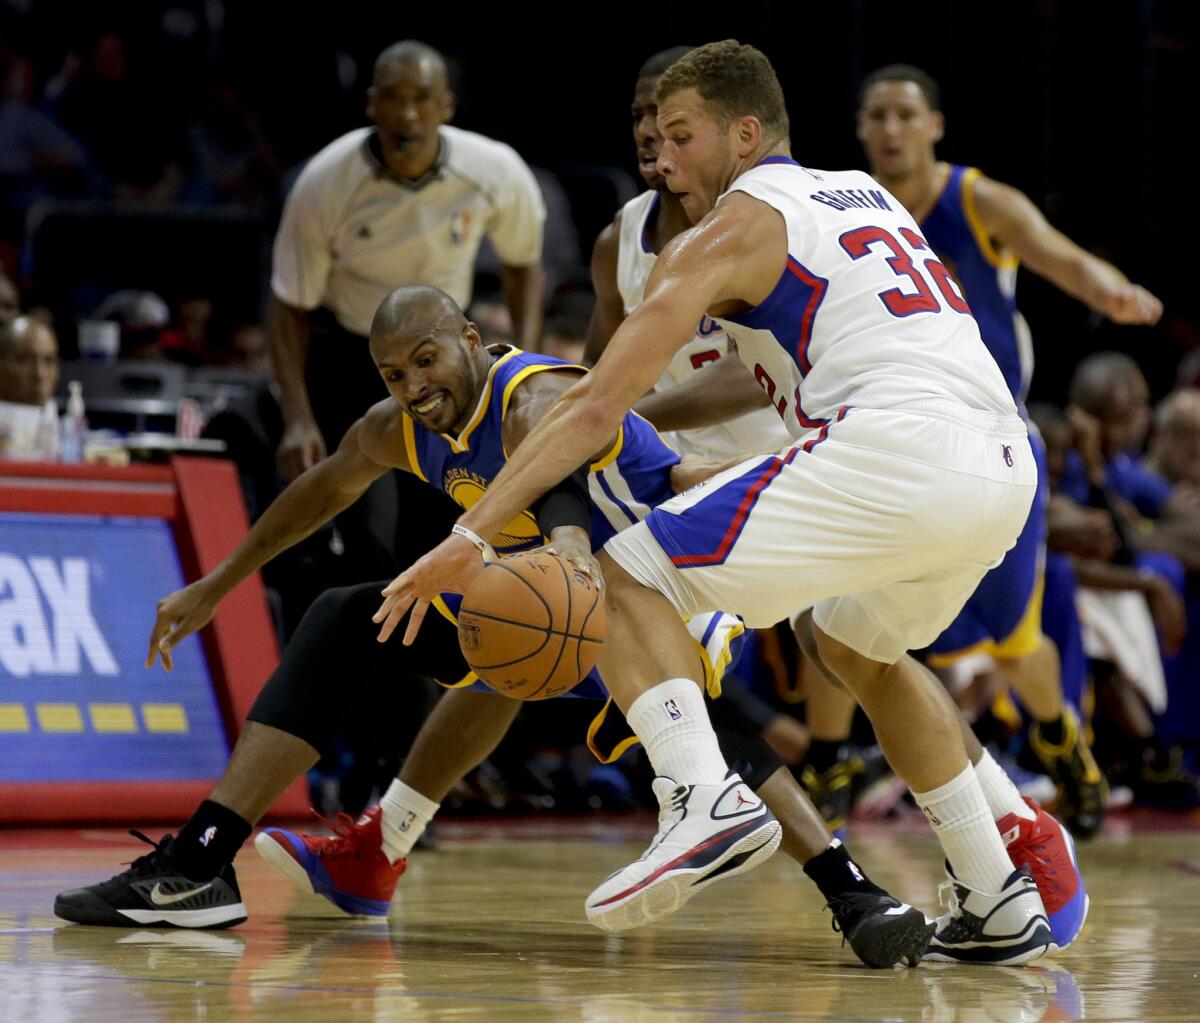 Clippers forward Blake Griffin steals the ball from Golden State Warriors guard Leandro Barbosa on Oct. 7.